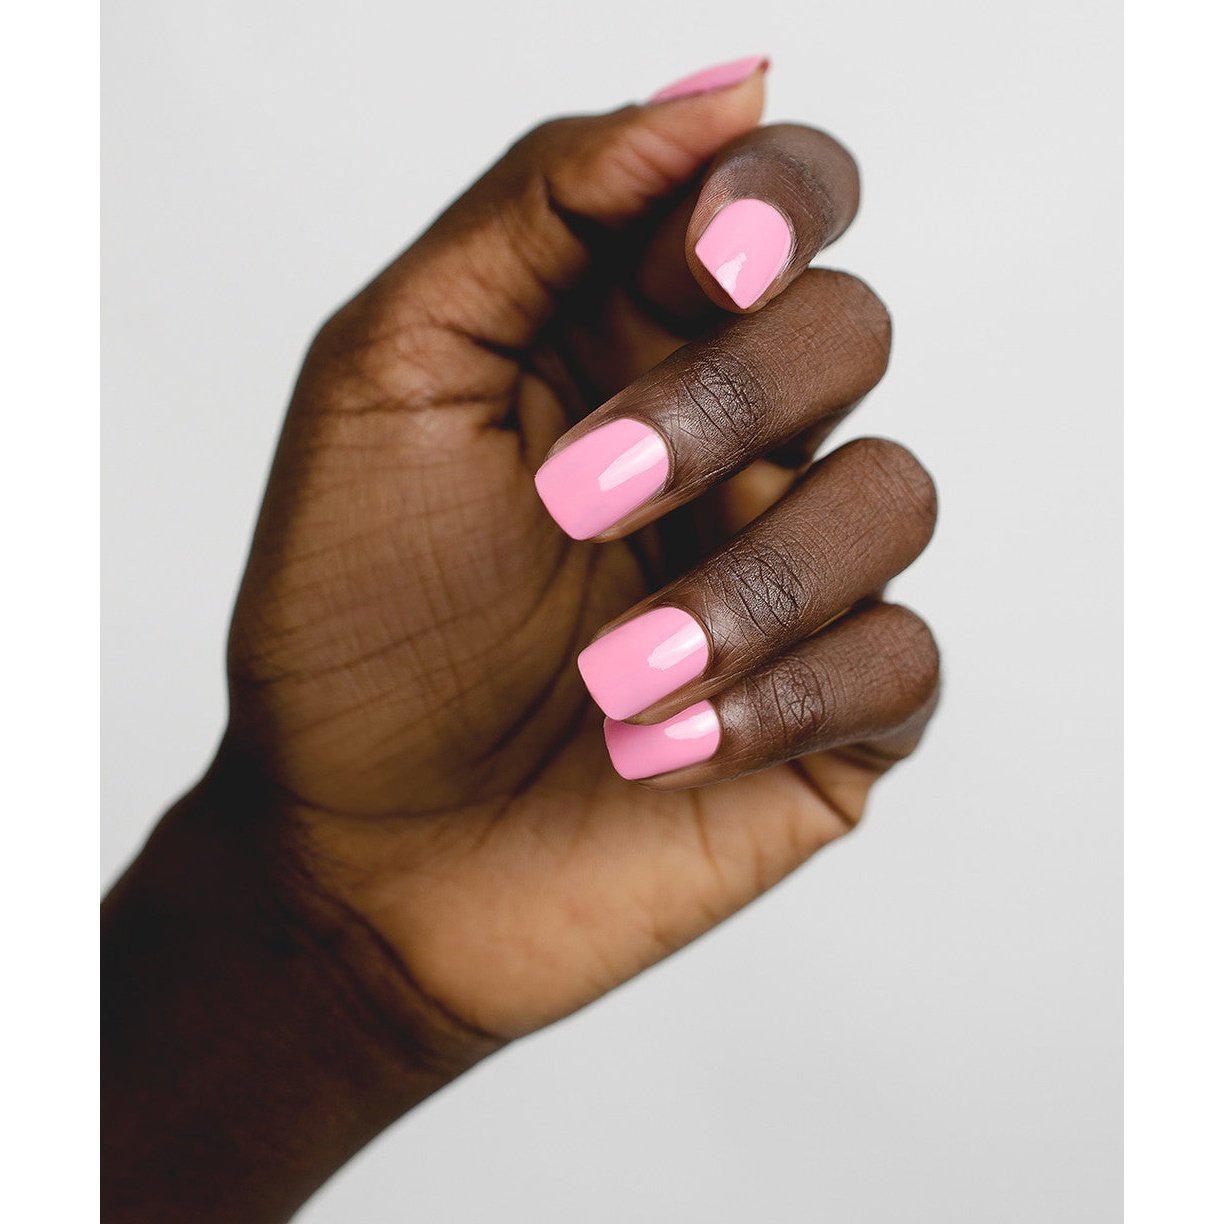 As a brown skin female, what would be the perfect nail color to get for  Acrylic nails? - Quora